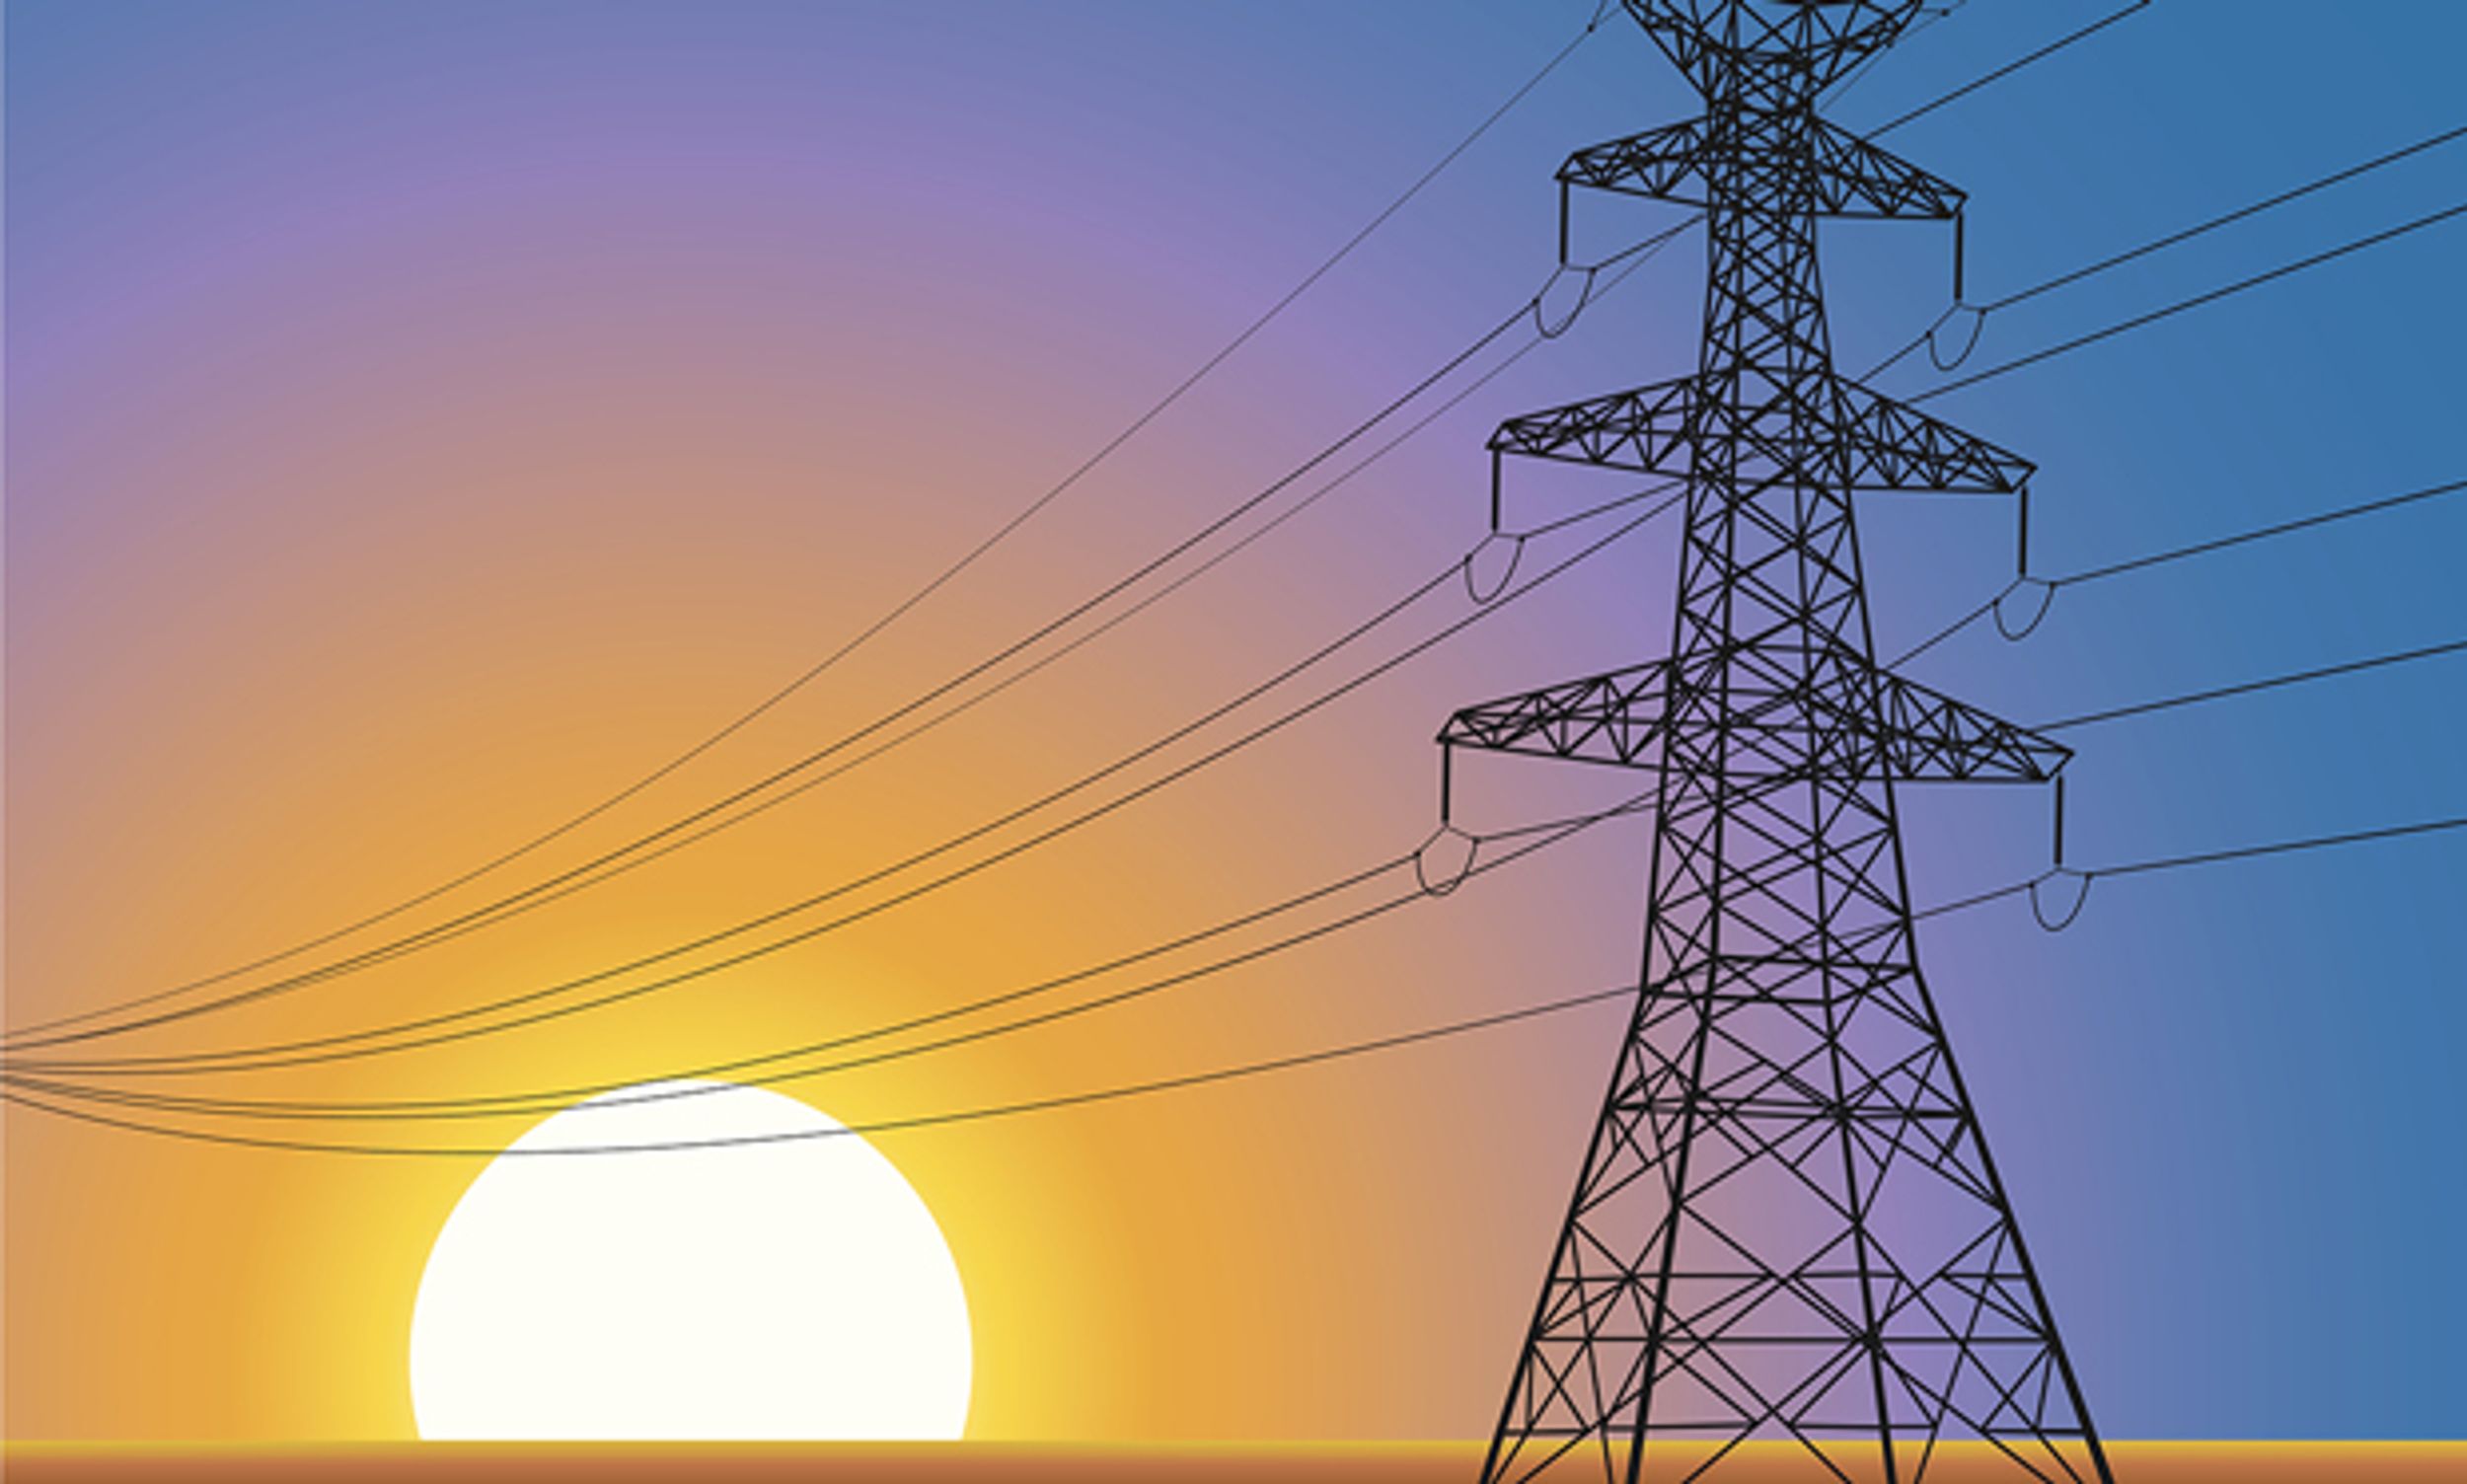 Illustration of a power line on a sunset background